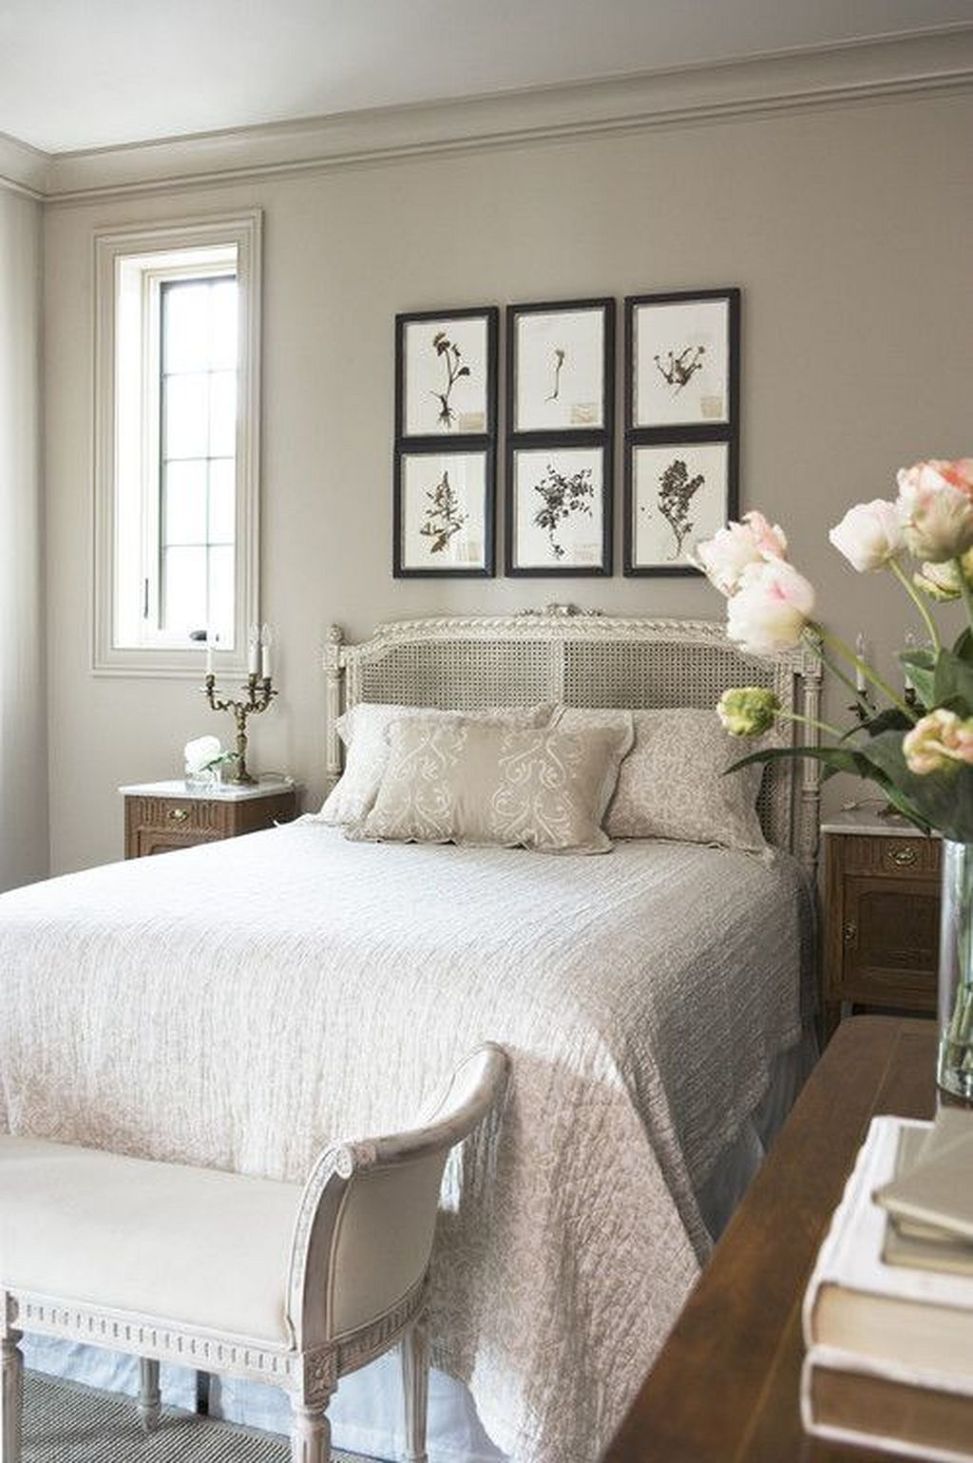 Neutral colored bedroom with a bare window.